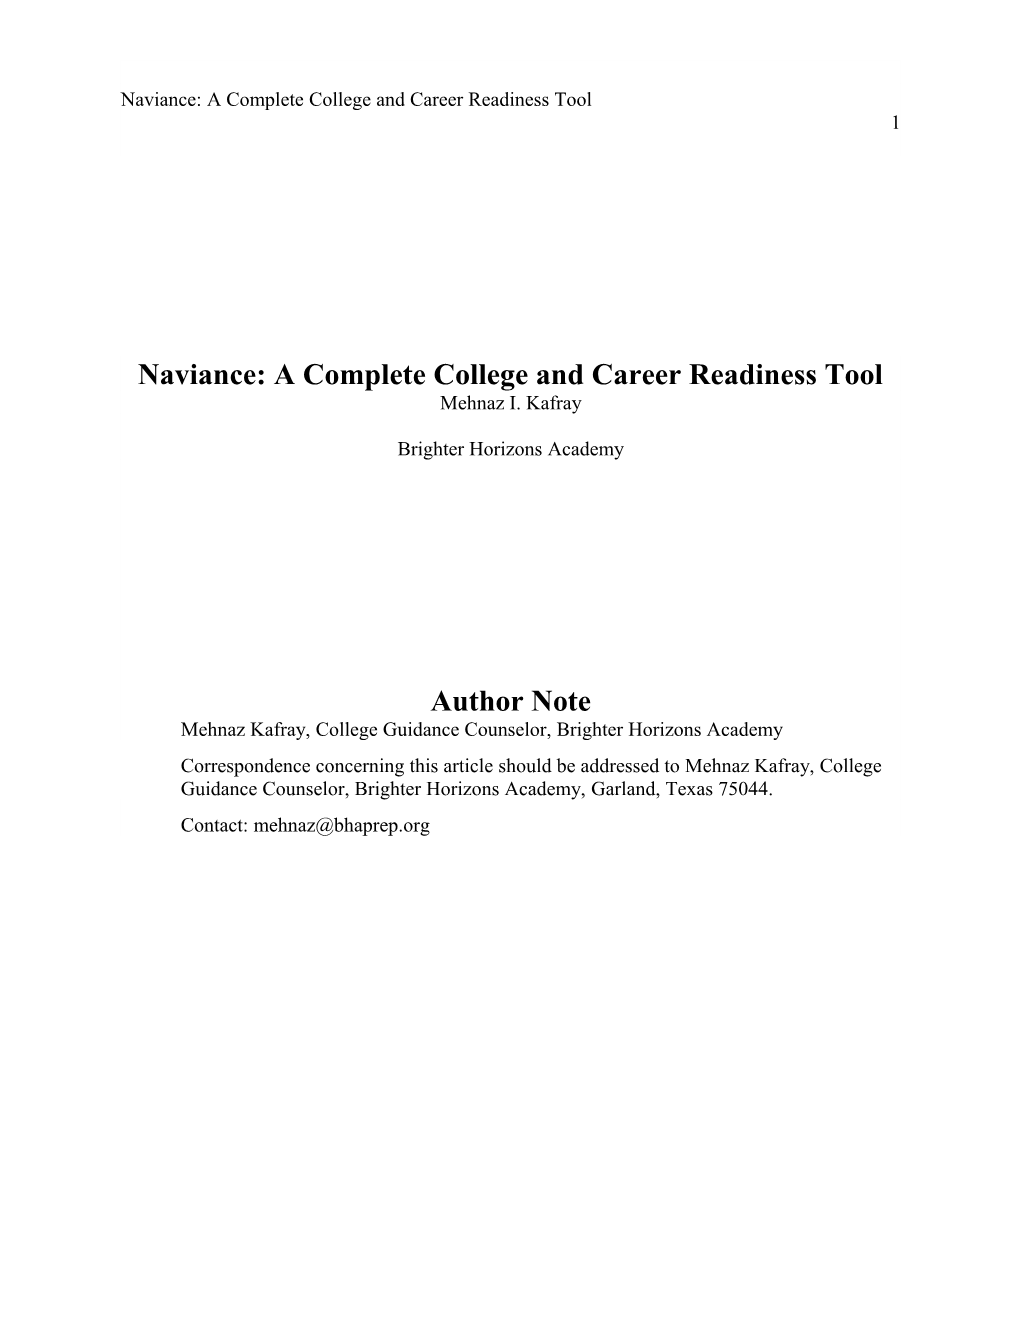 Naviance: a Complete College and Career Readiness Tool